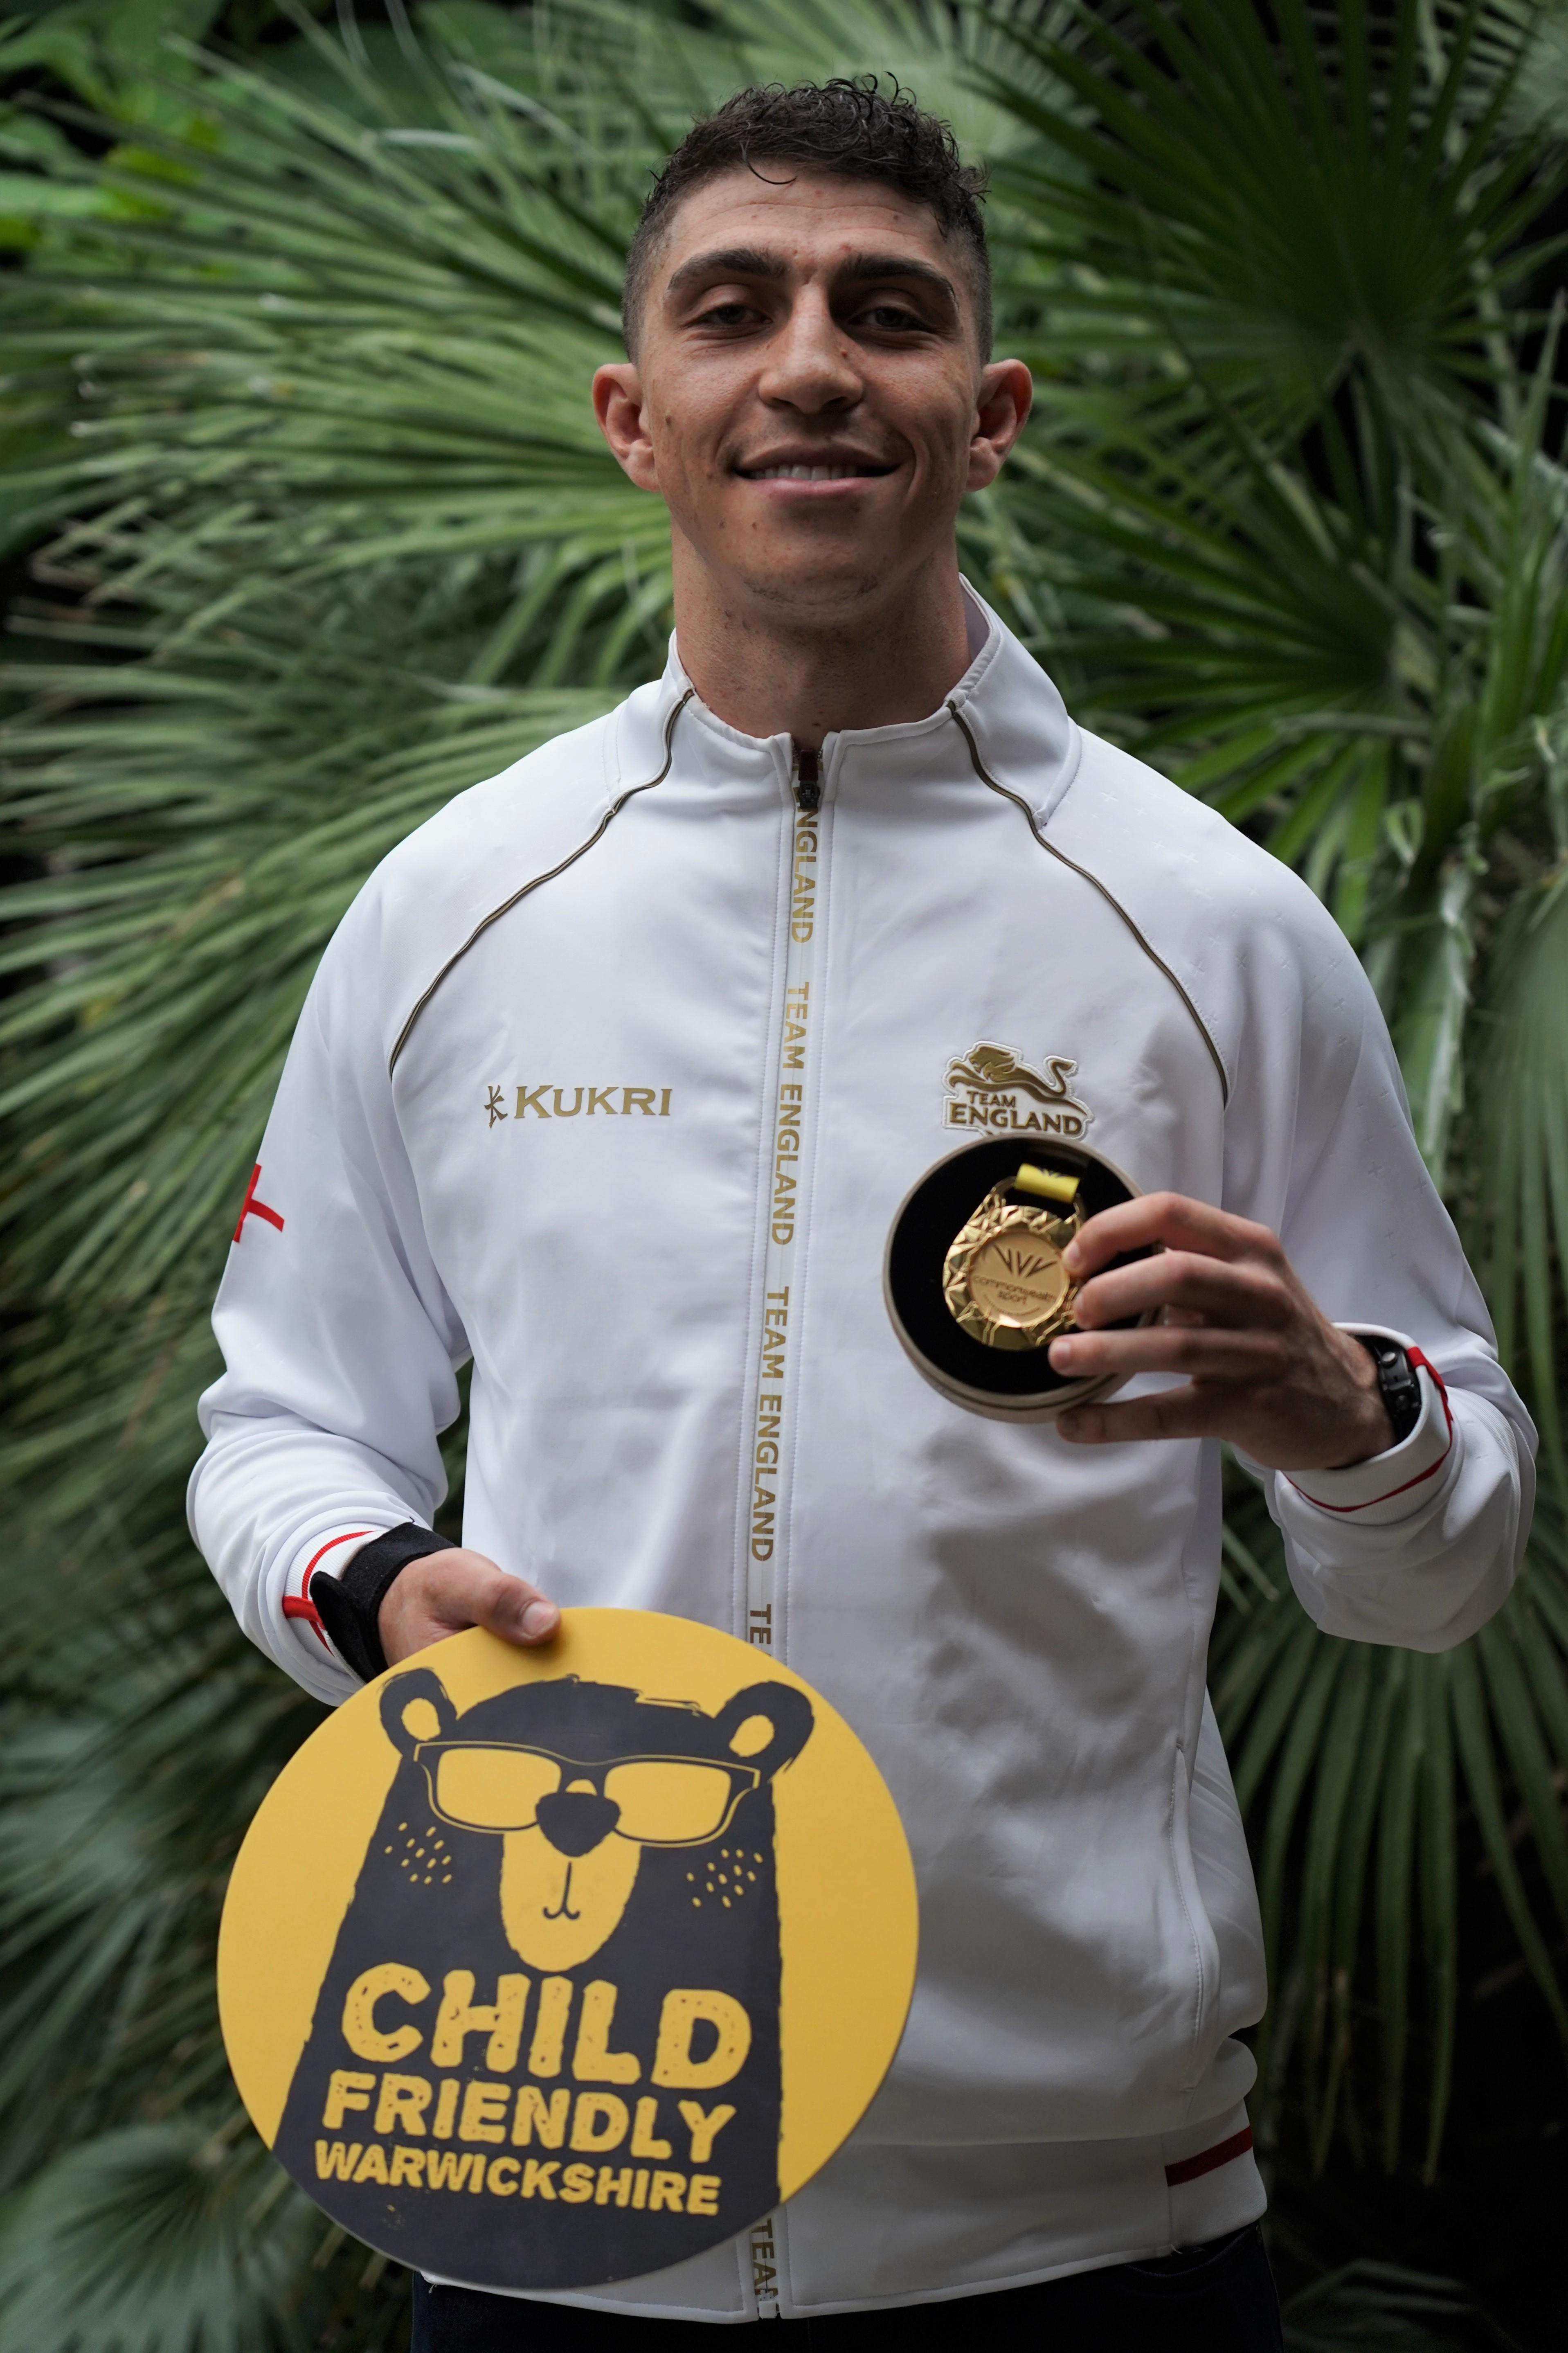 Lewis Williams in his England uniform with his gold medal, holding the CFW logo